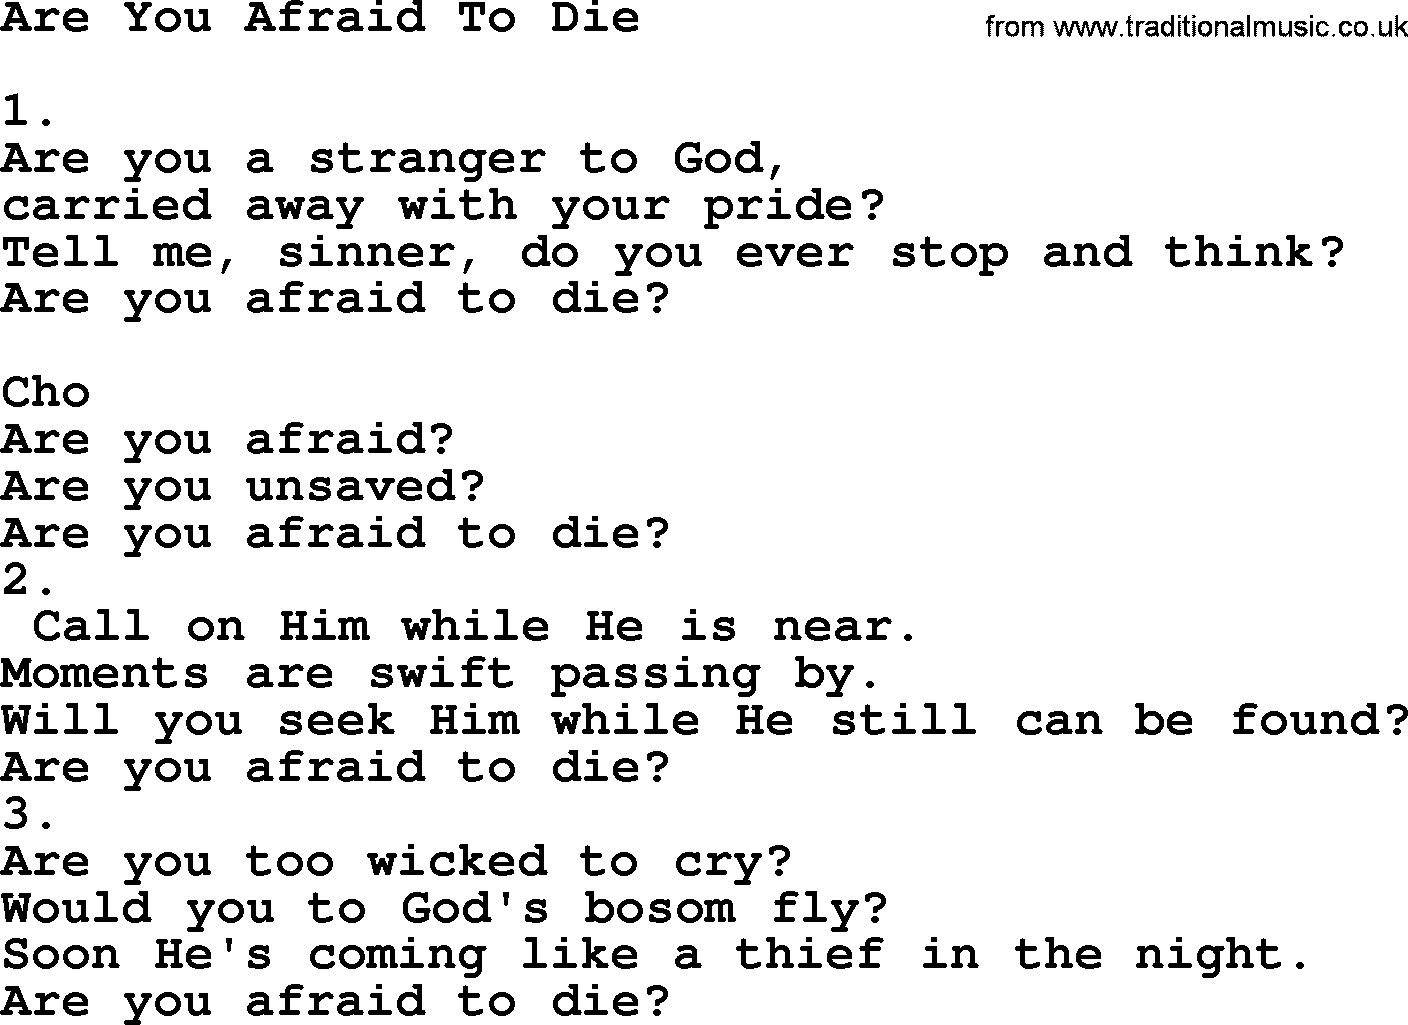 Apostolic & Pentecostal Hymns and Songs, Hymn: Are You Afraid To Die lyrics and PDF